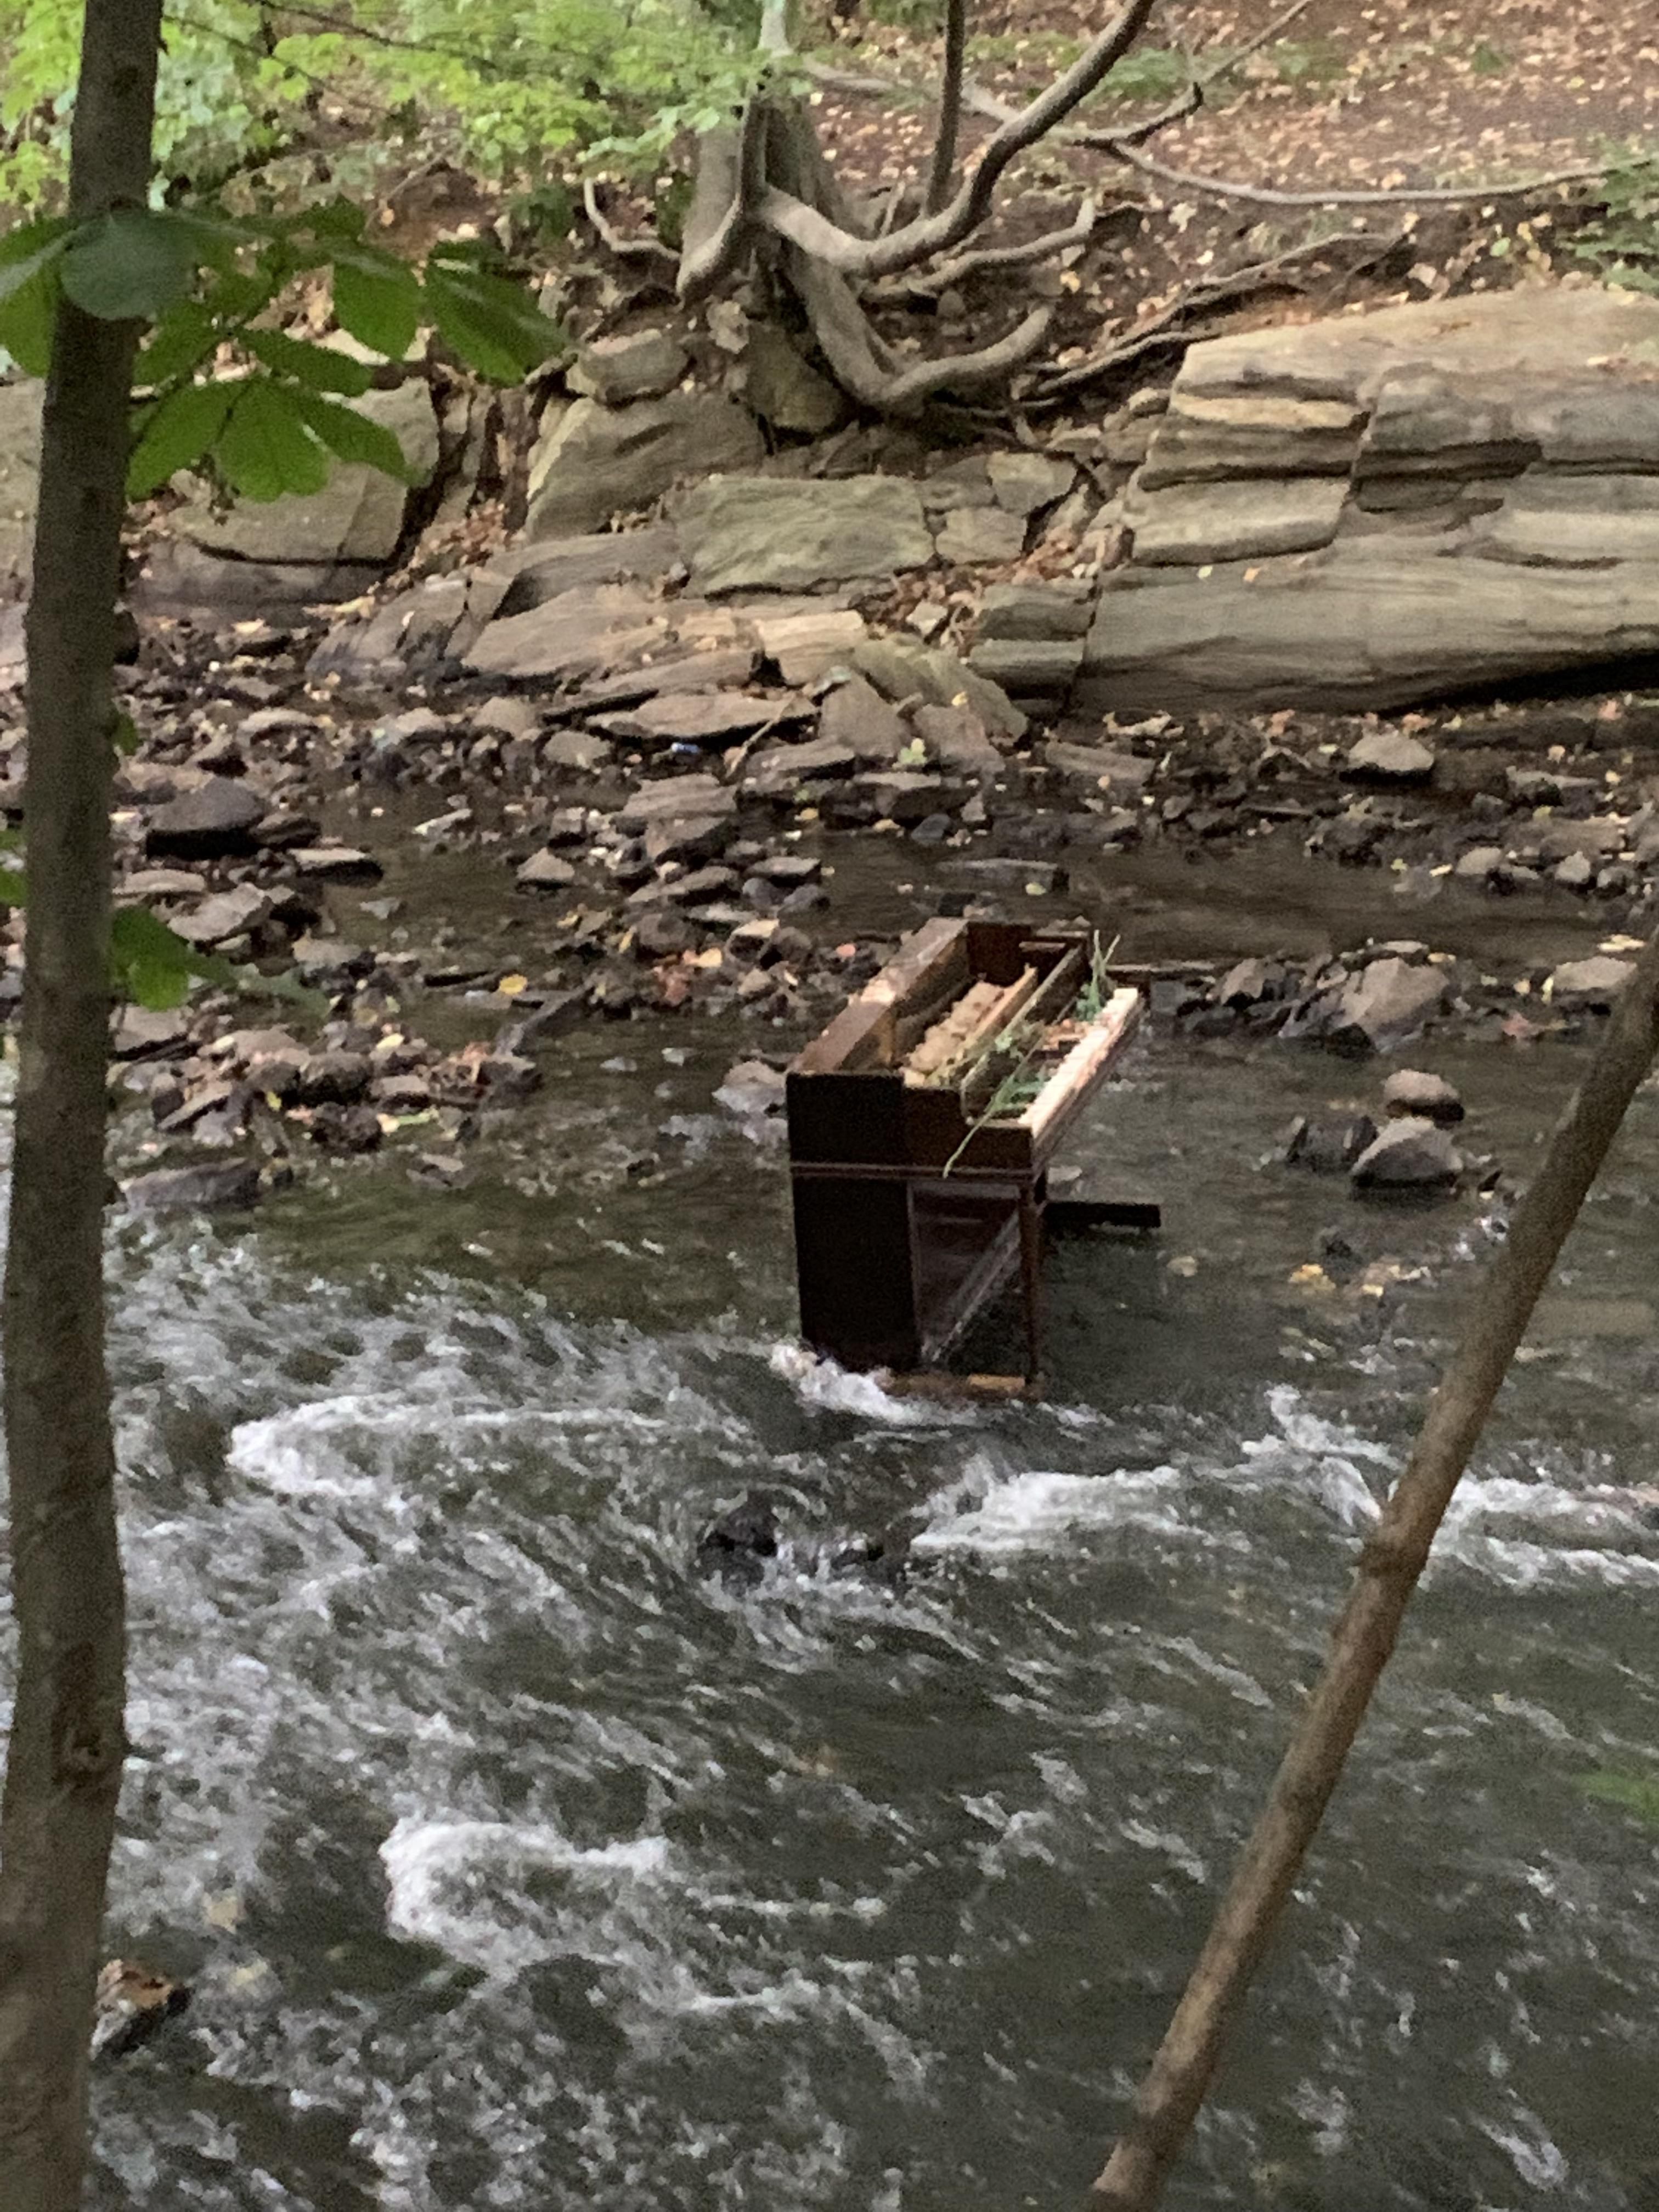 A piano I spotted in a river on my run this morning. It has not rained a lot lately, and it appeared here in the last 48 hours.